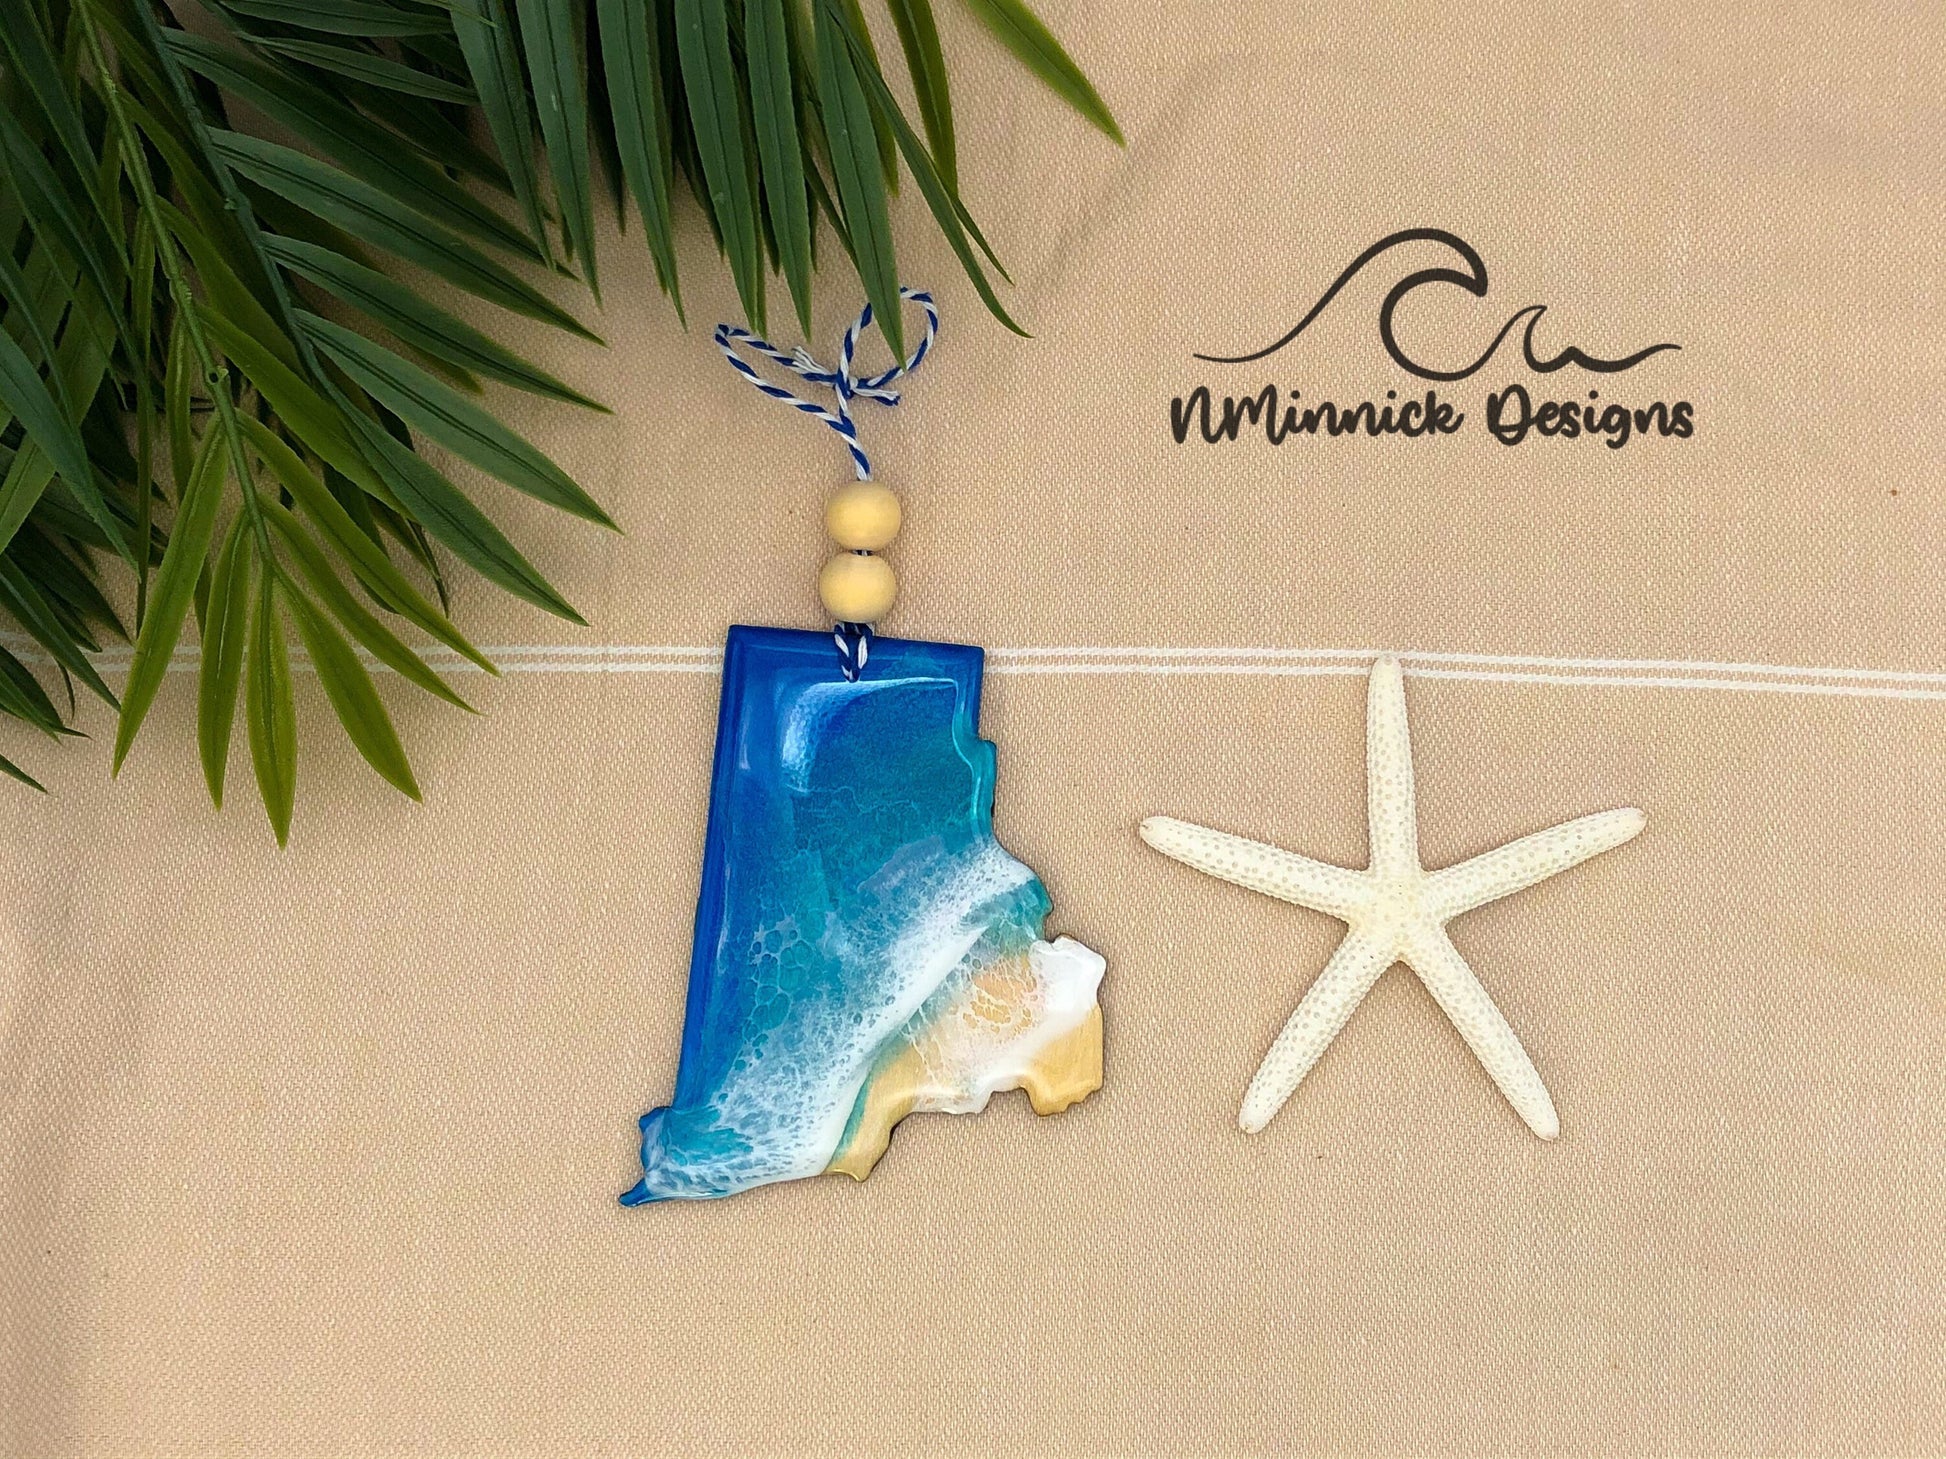 a laser cut wood ornament in the shape of Rhode Island. Ornament is approx 4 inches long and 1/8 inch thick and is covered in blue, teal, and white epoxy to make it look like ocean waves on a beach.